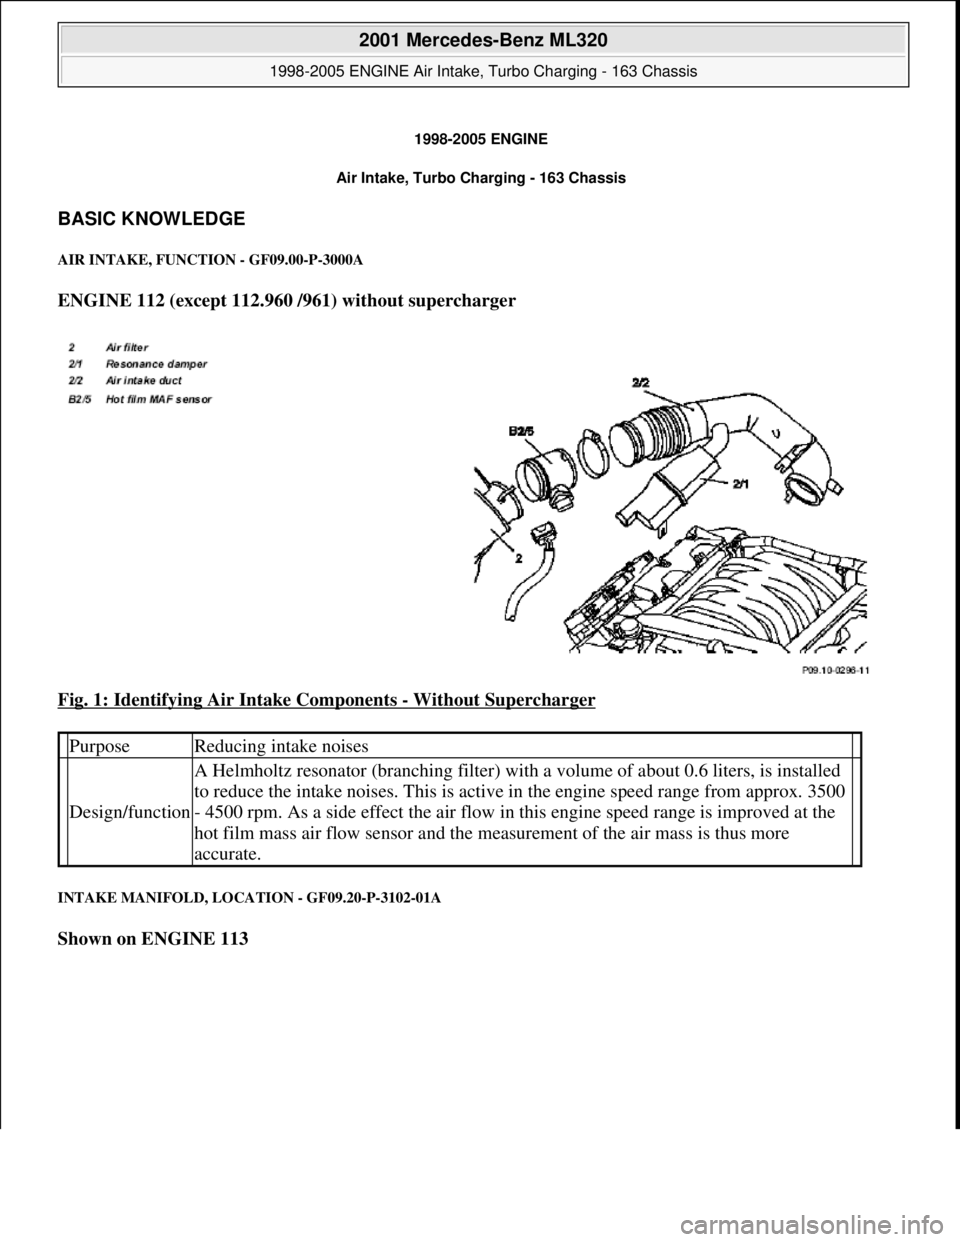 MERCEDES-BENZ ML350 1997  Complete Repair Manual 1998-2005 ENGINE
Air Intake, Turbo Charging - 163 Chassis 
BASIC KNOWLEDGE 
AIR INTAKE, FUNCTION - GF09.00-P-3000A 
ENGINE 112 (except 112.960 /961) without supercharger  
Fig. 1: Identifying Air Inta